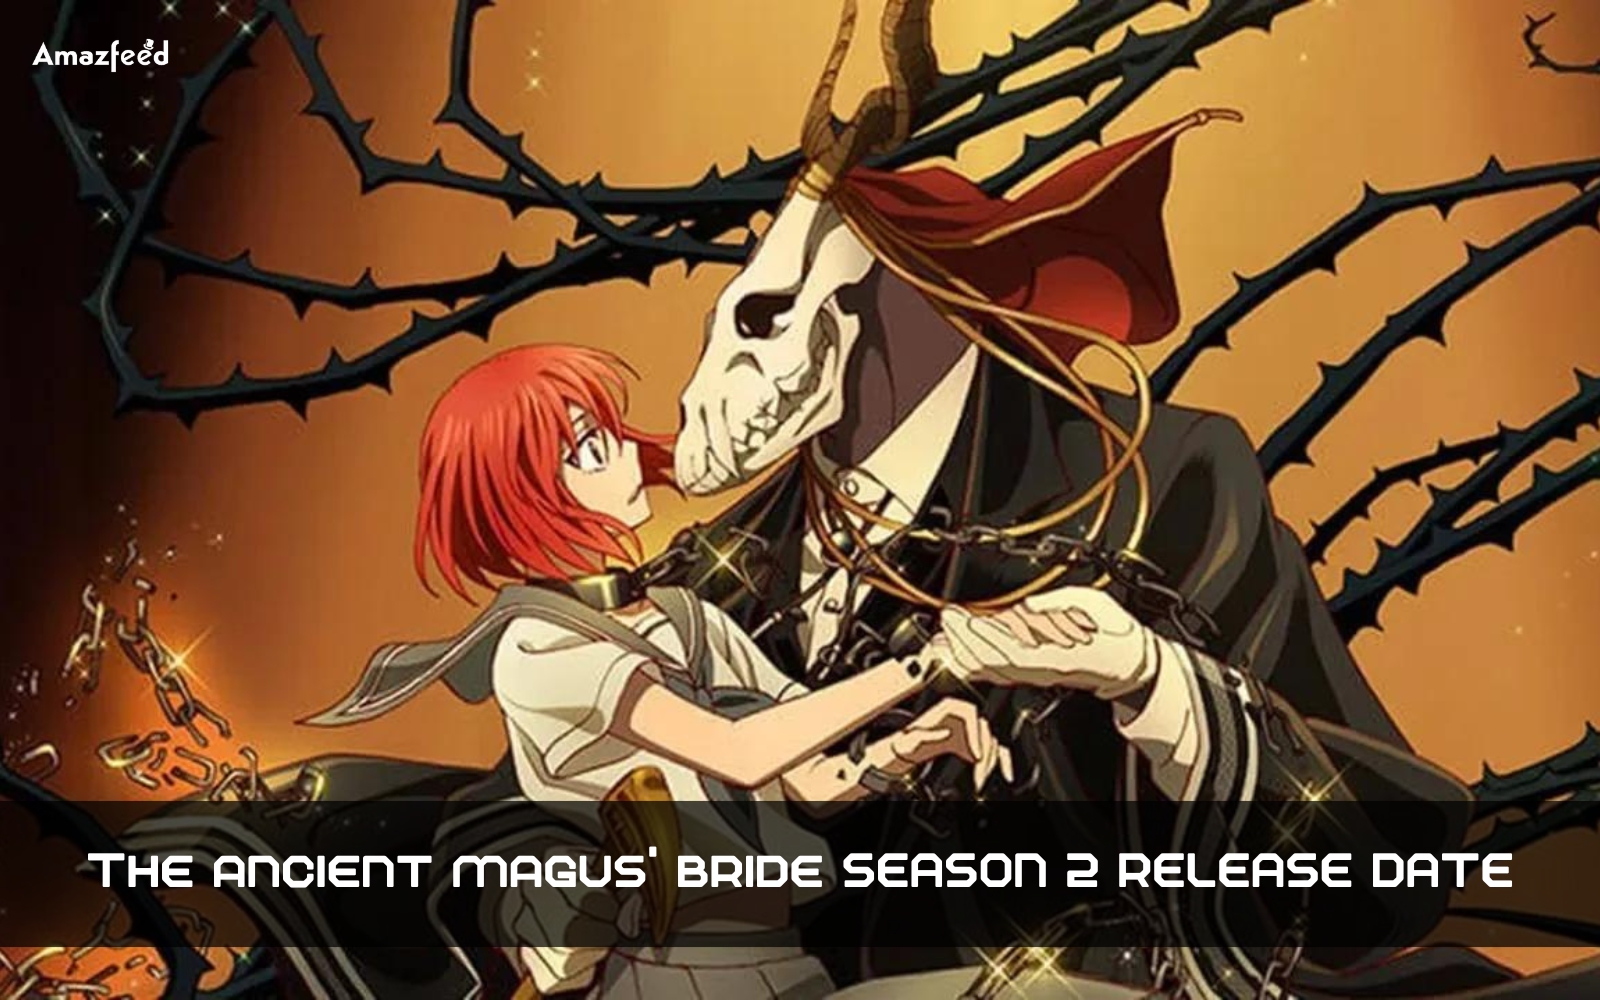 THE ANCIENT MAGUS' BRIDE SEASON 2 RELEASE DATe